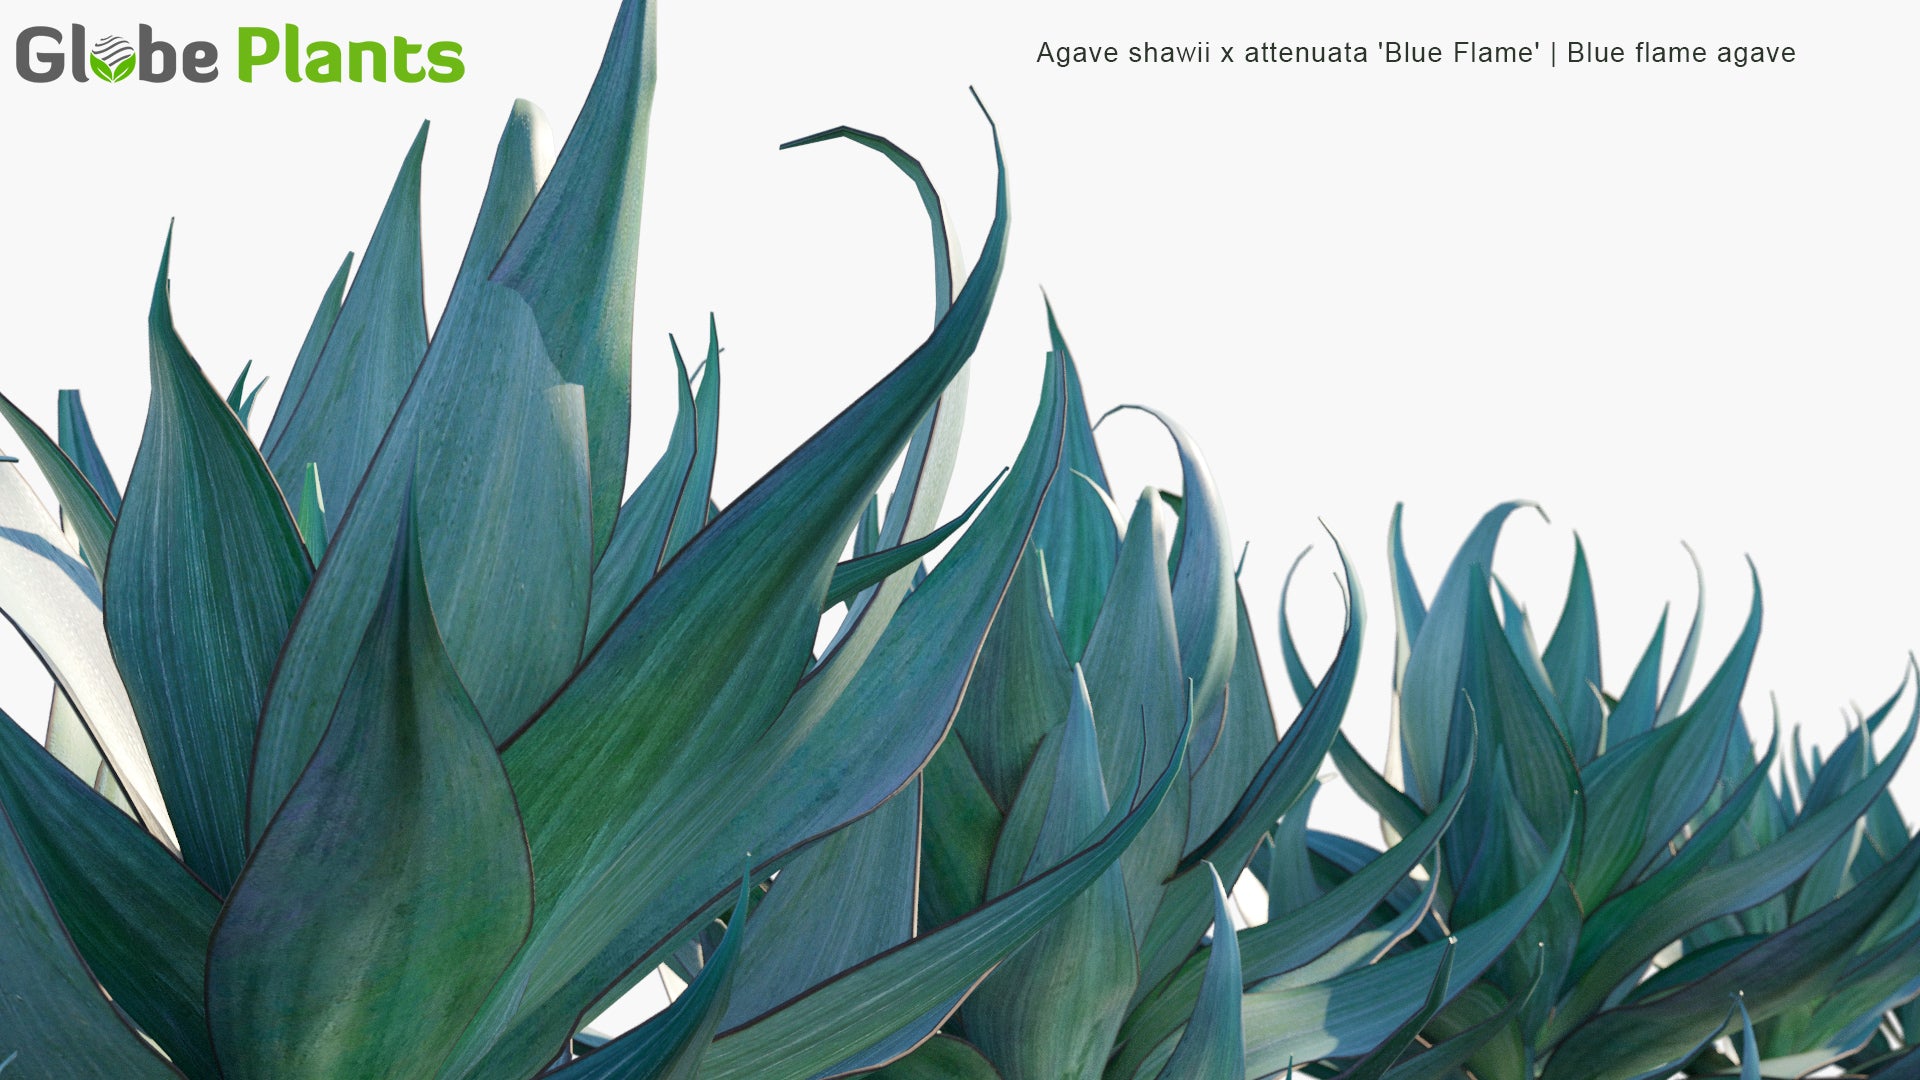 Low Poly Agave Shawii x Attenuata 'Blue Flame' - Blue Flame Agave (3D Model)